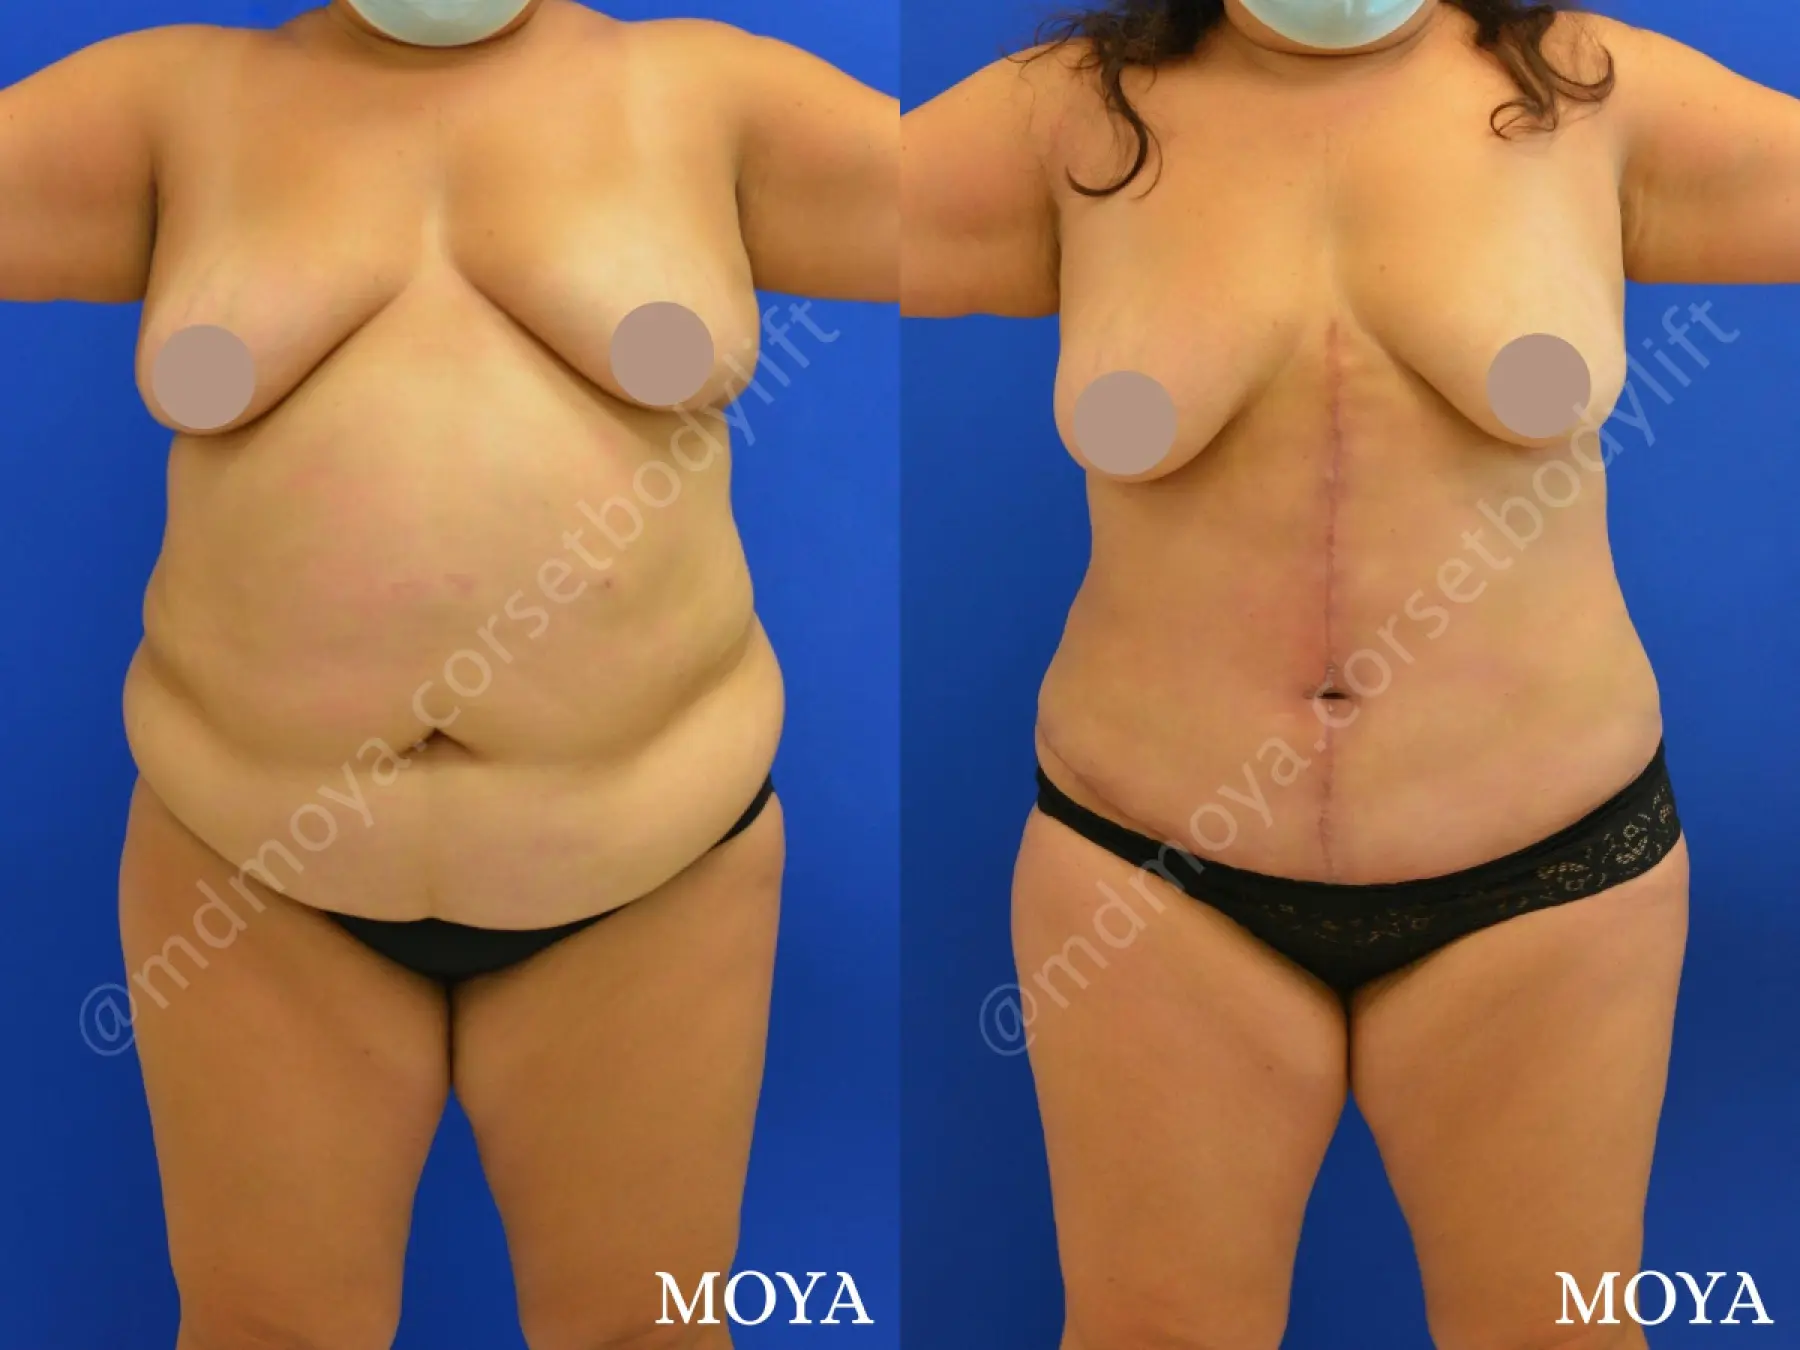 Fleur-de-lis Tummy Tuck (std):  BMI 32 - Before and After  